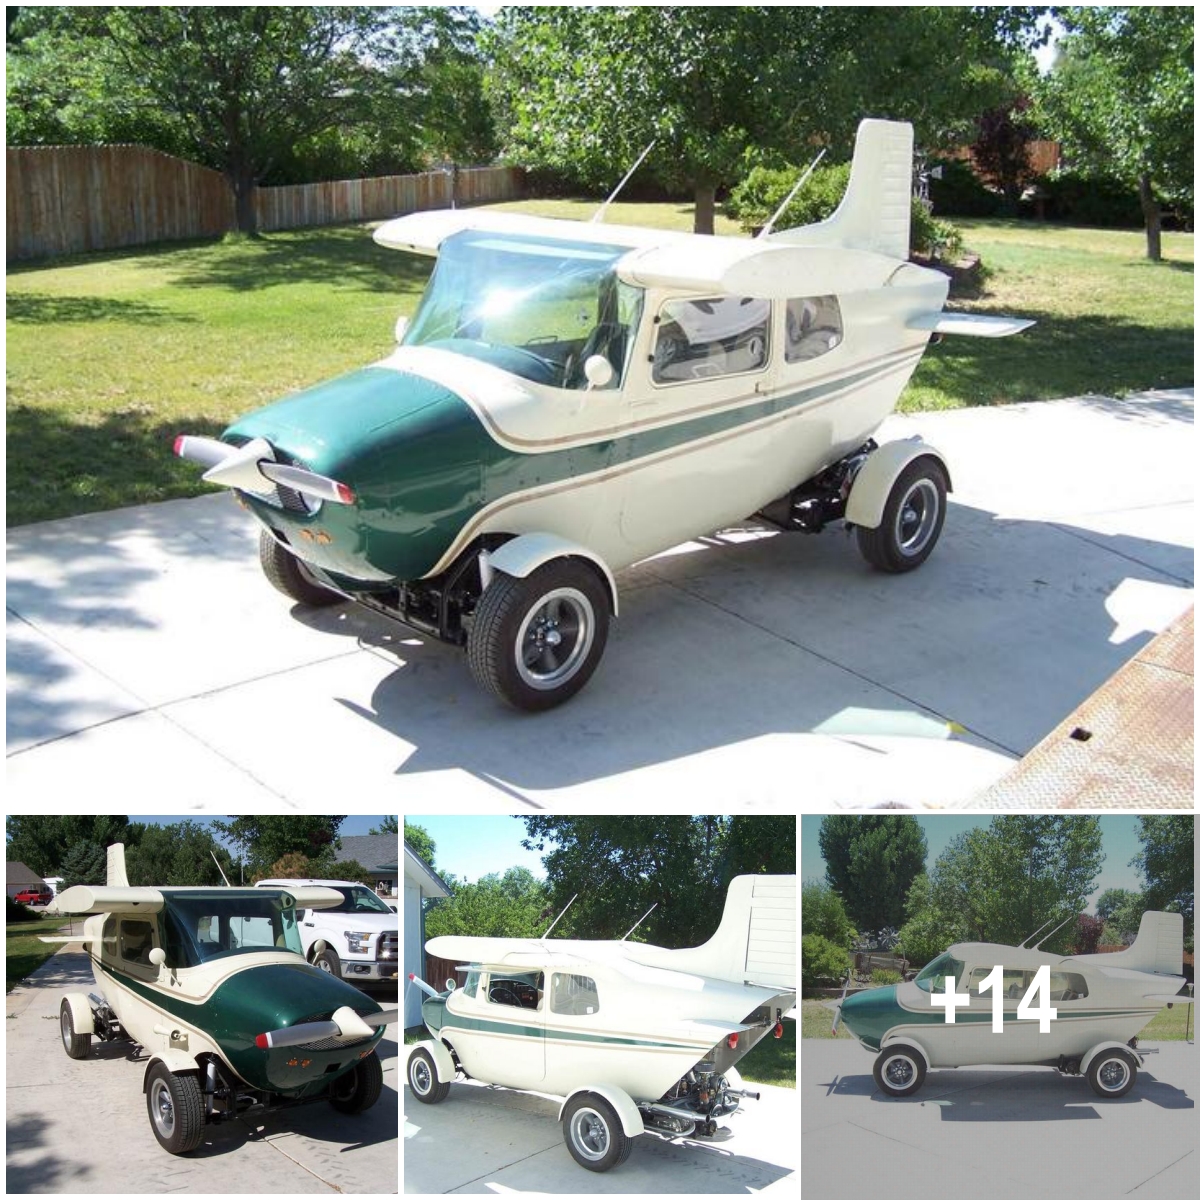 Craigslist Gold: The Cessna 172 on a VW Bug Chassis